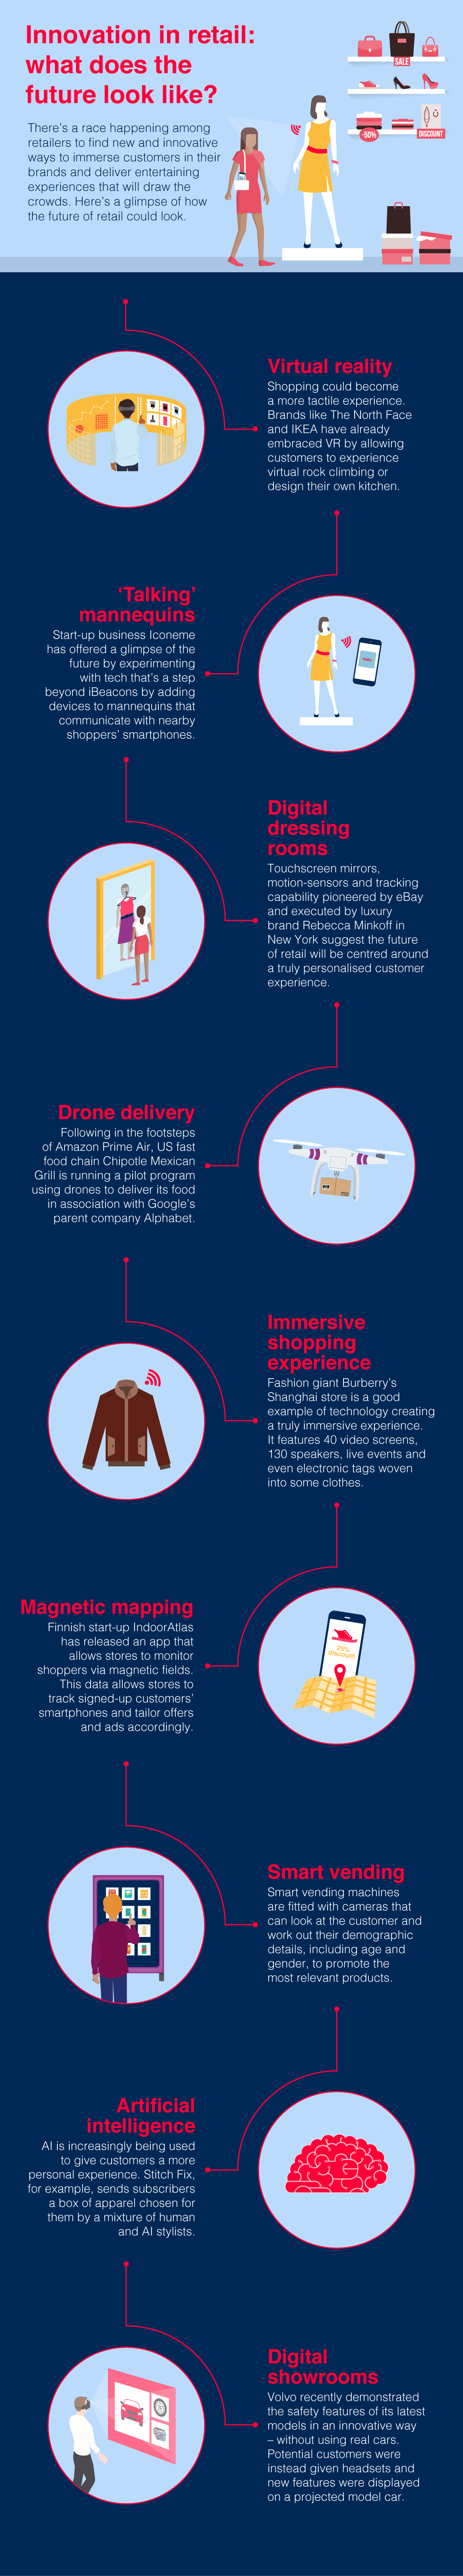 future of retail infographic